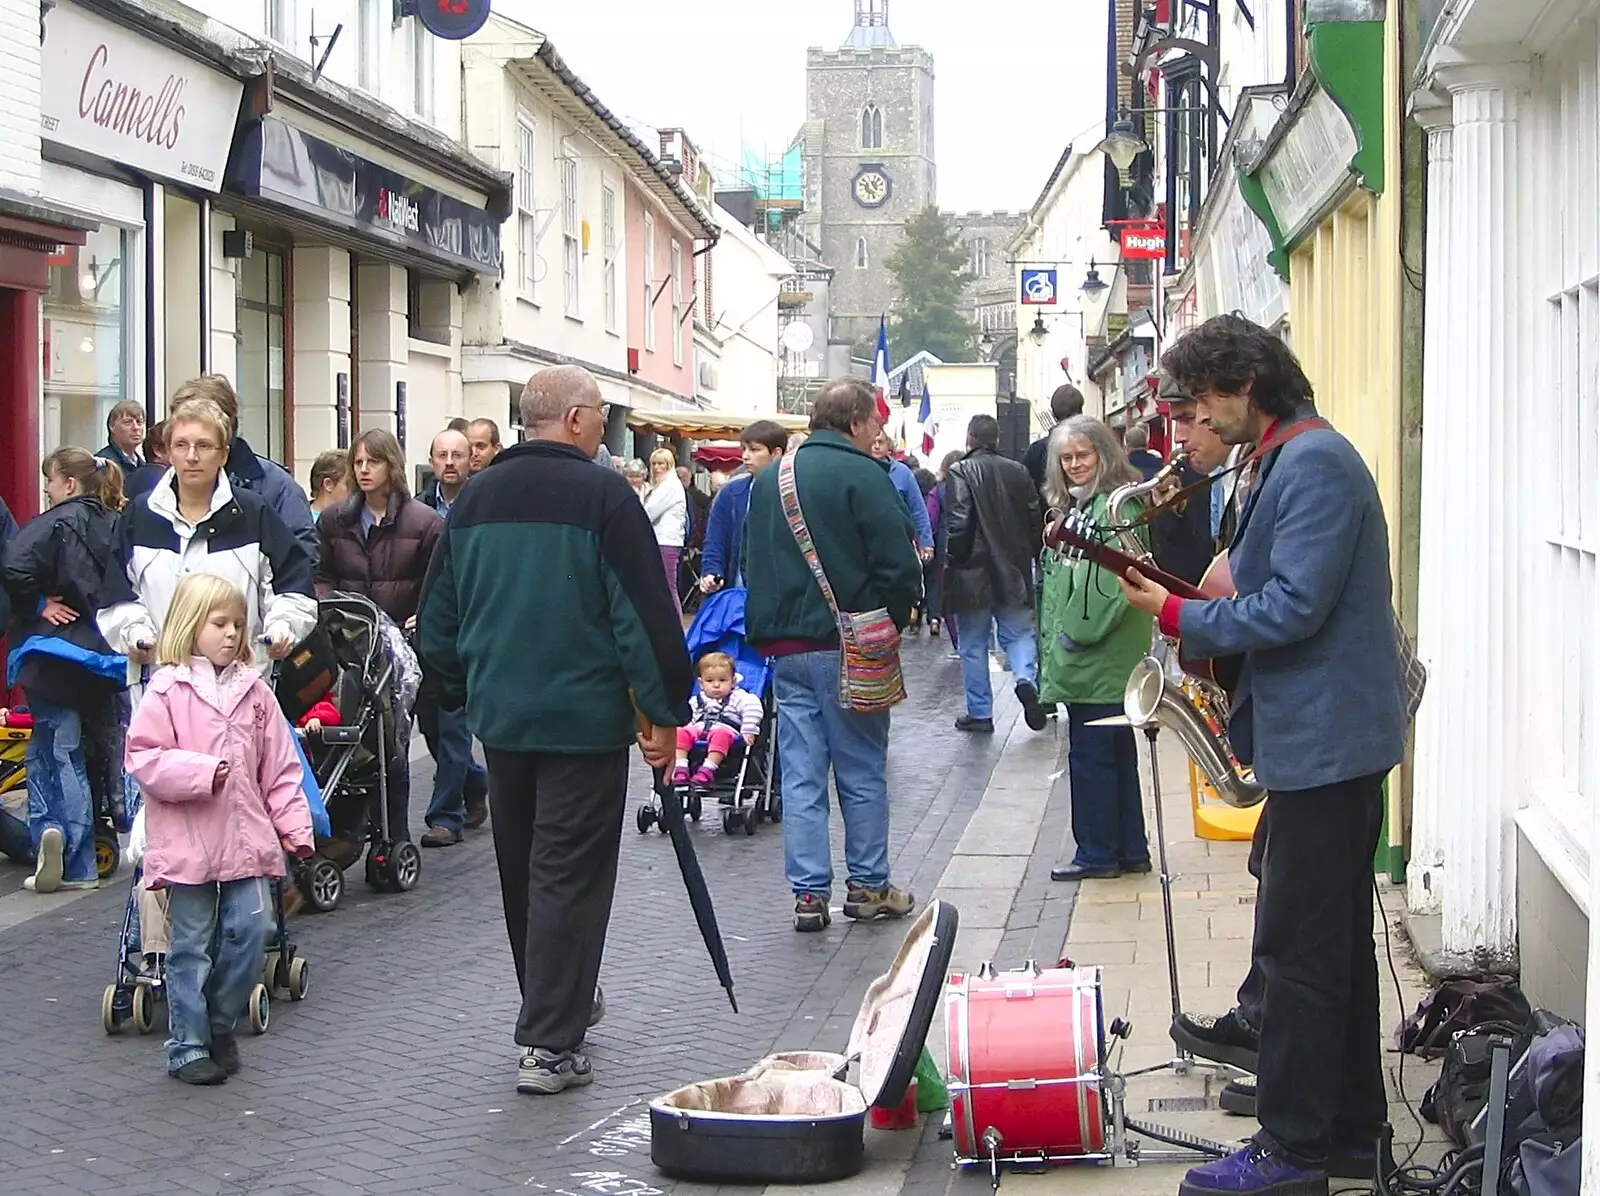 Swervy World do some busking on Mere Street, from A French Market, Blues and Curry, Diss, Scole and Brome - 17th October 2004